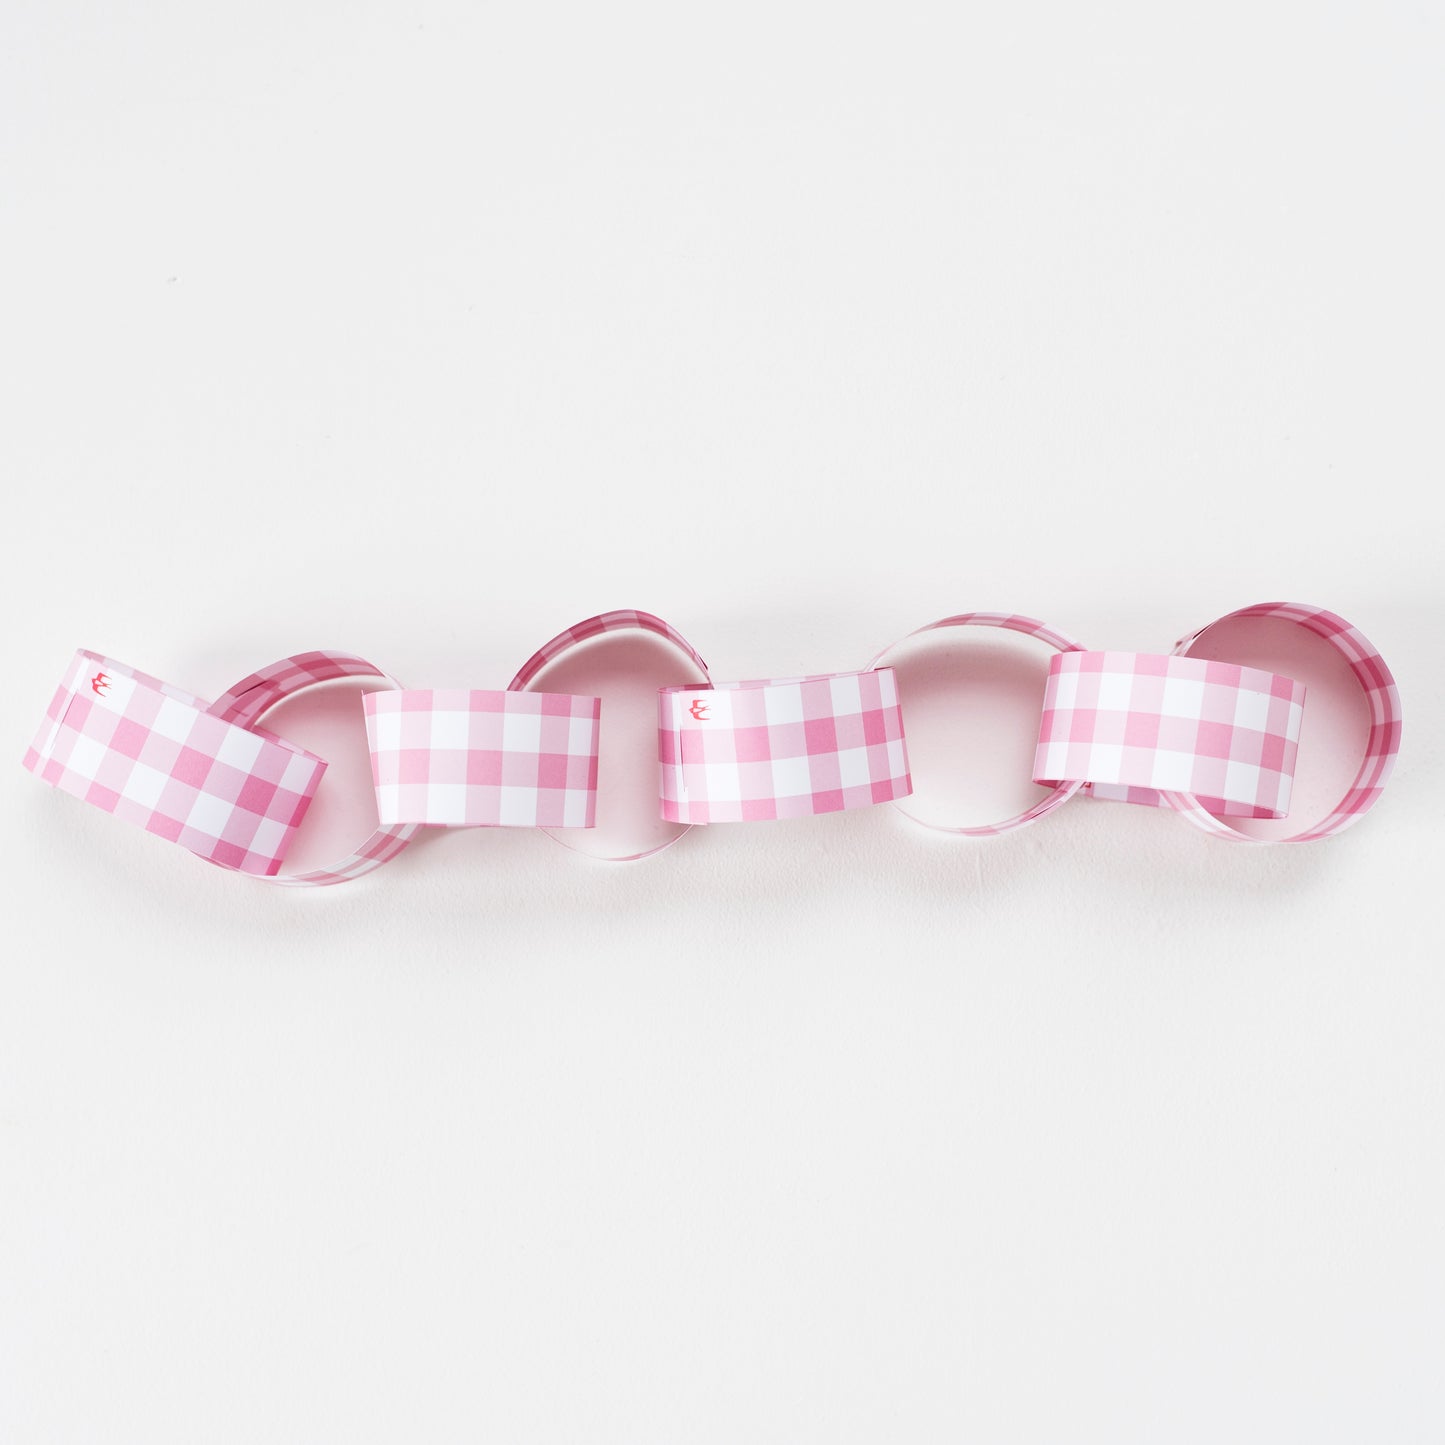 Gingham Paper Chain Craft Kit